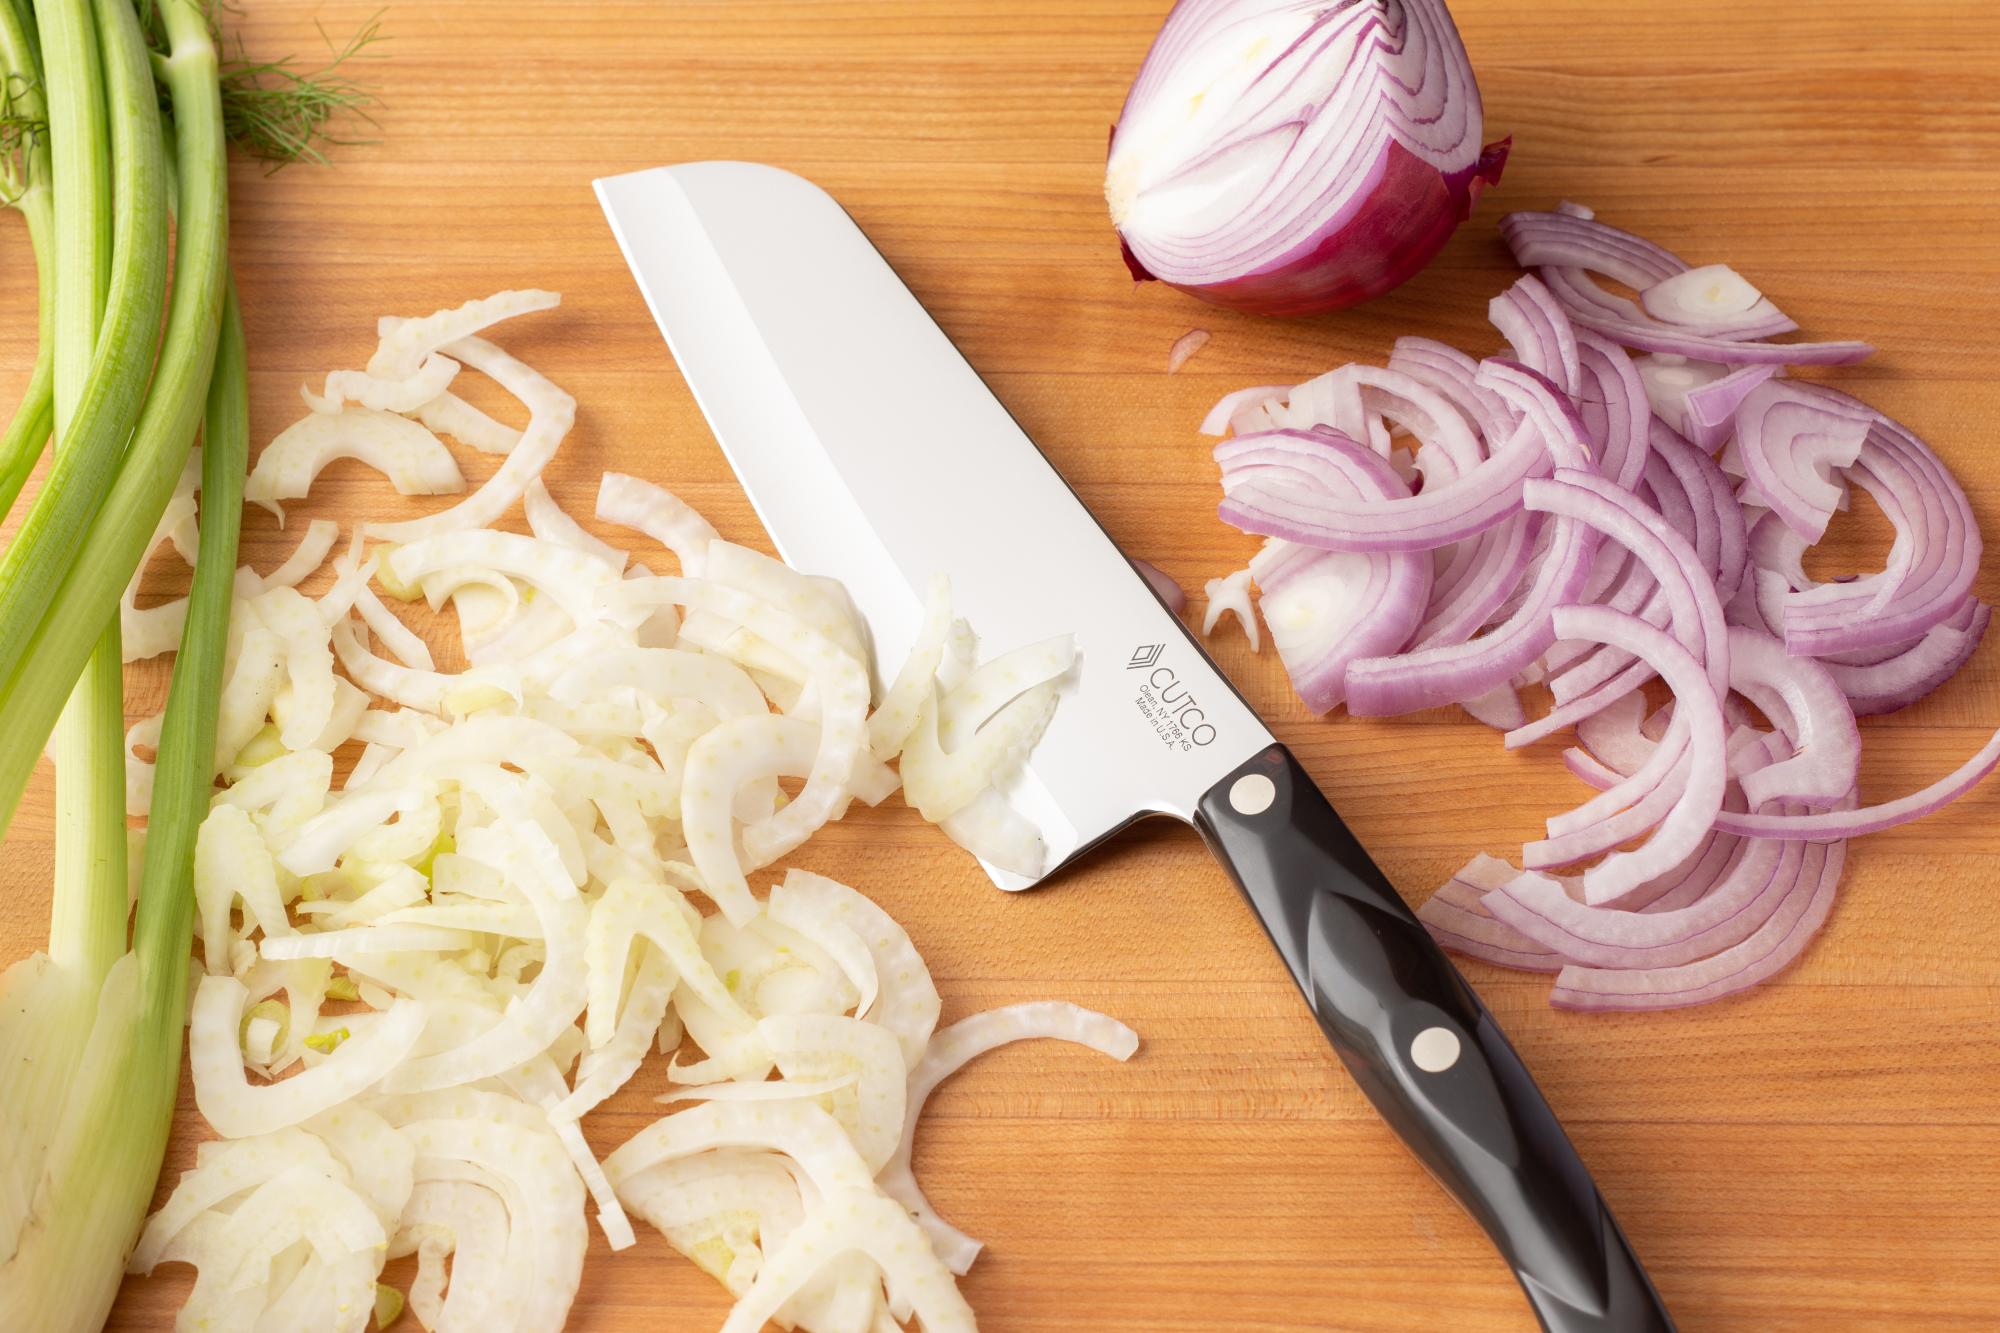 Using the Santoku to slice fennel and red onion.